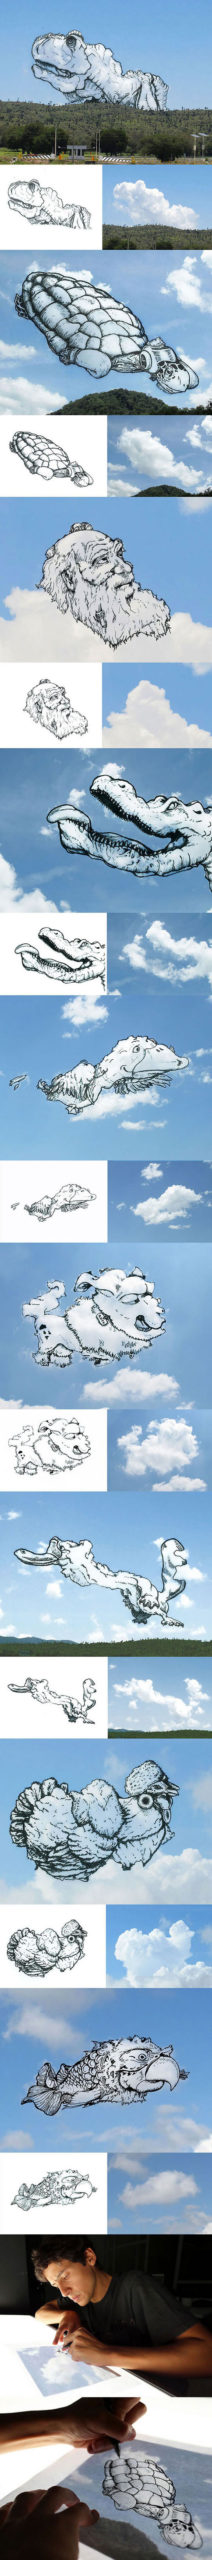 Artist+Converts+Clouds+Into+Illustrations